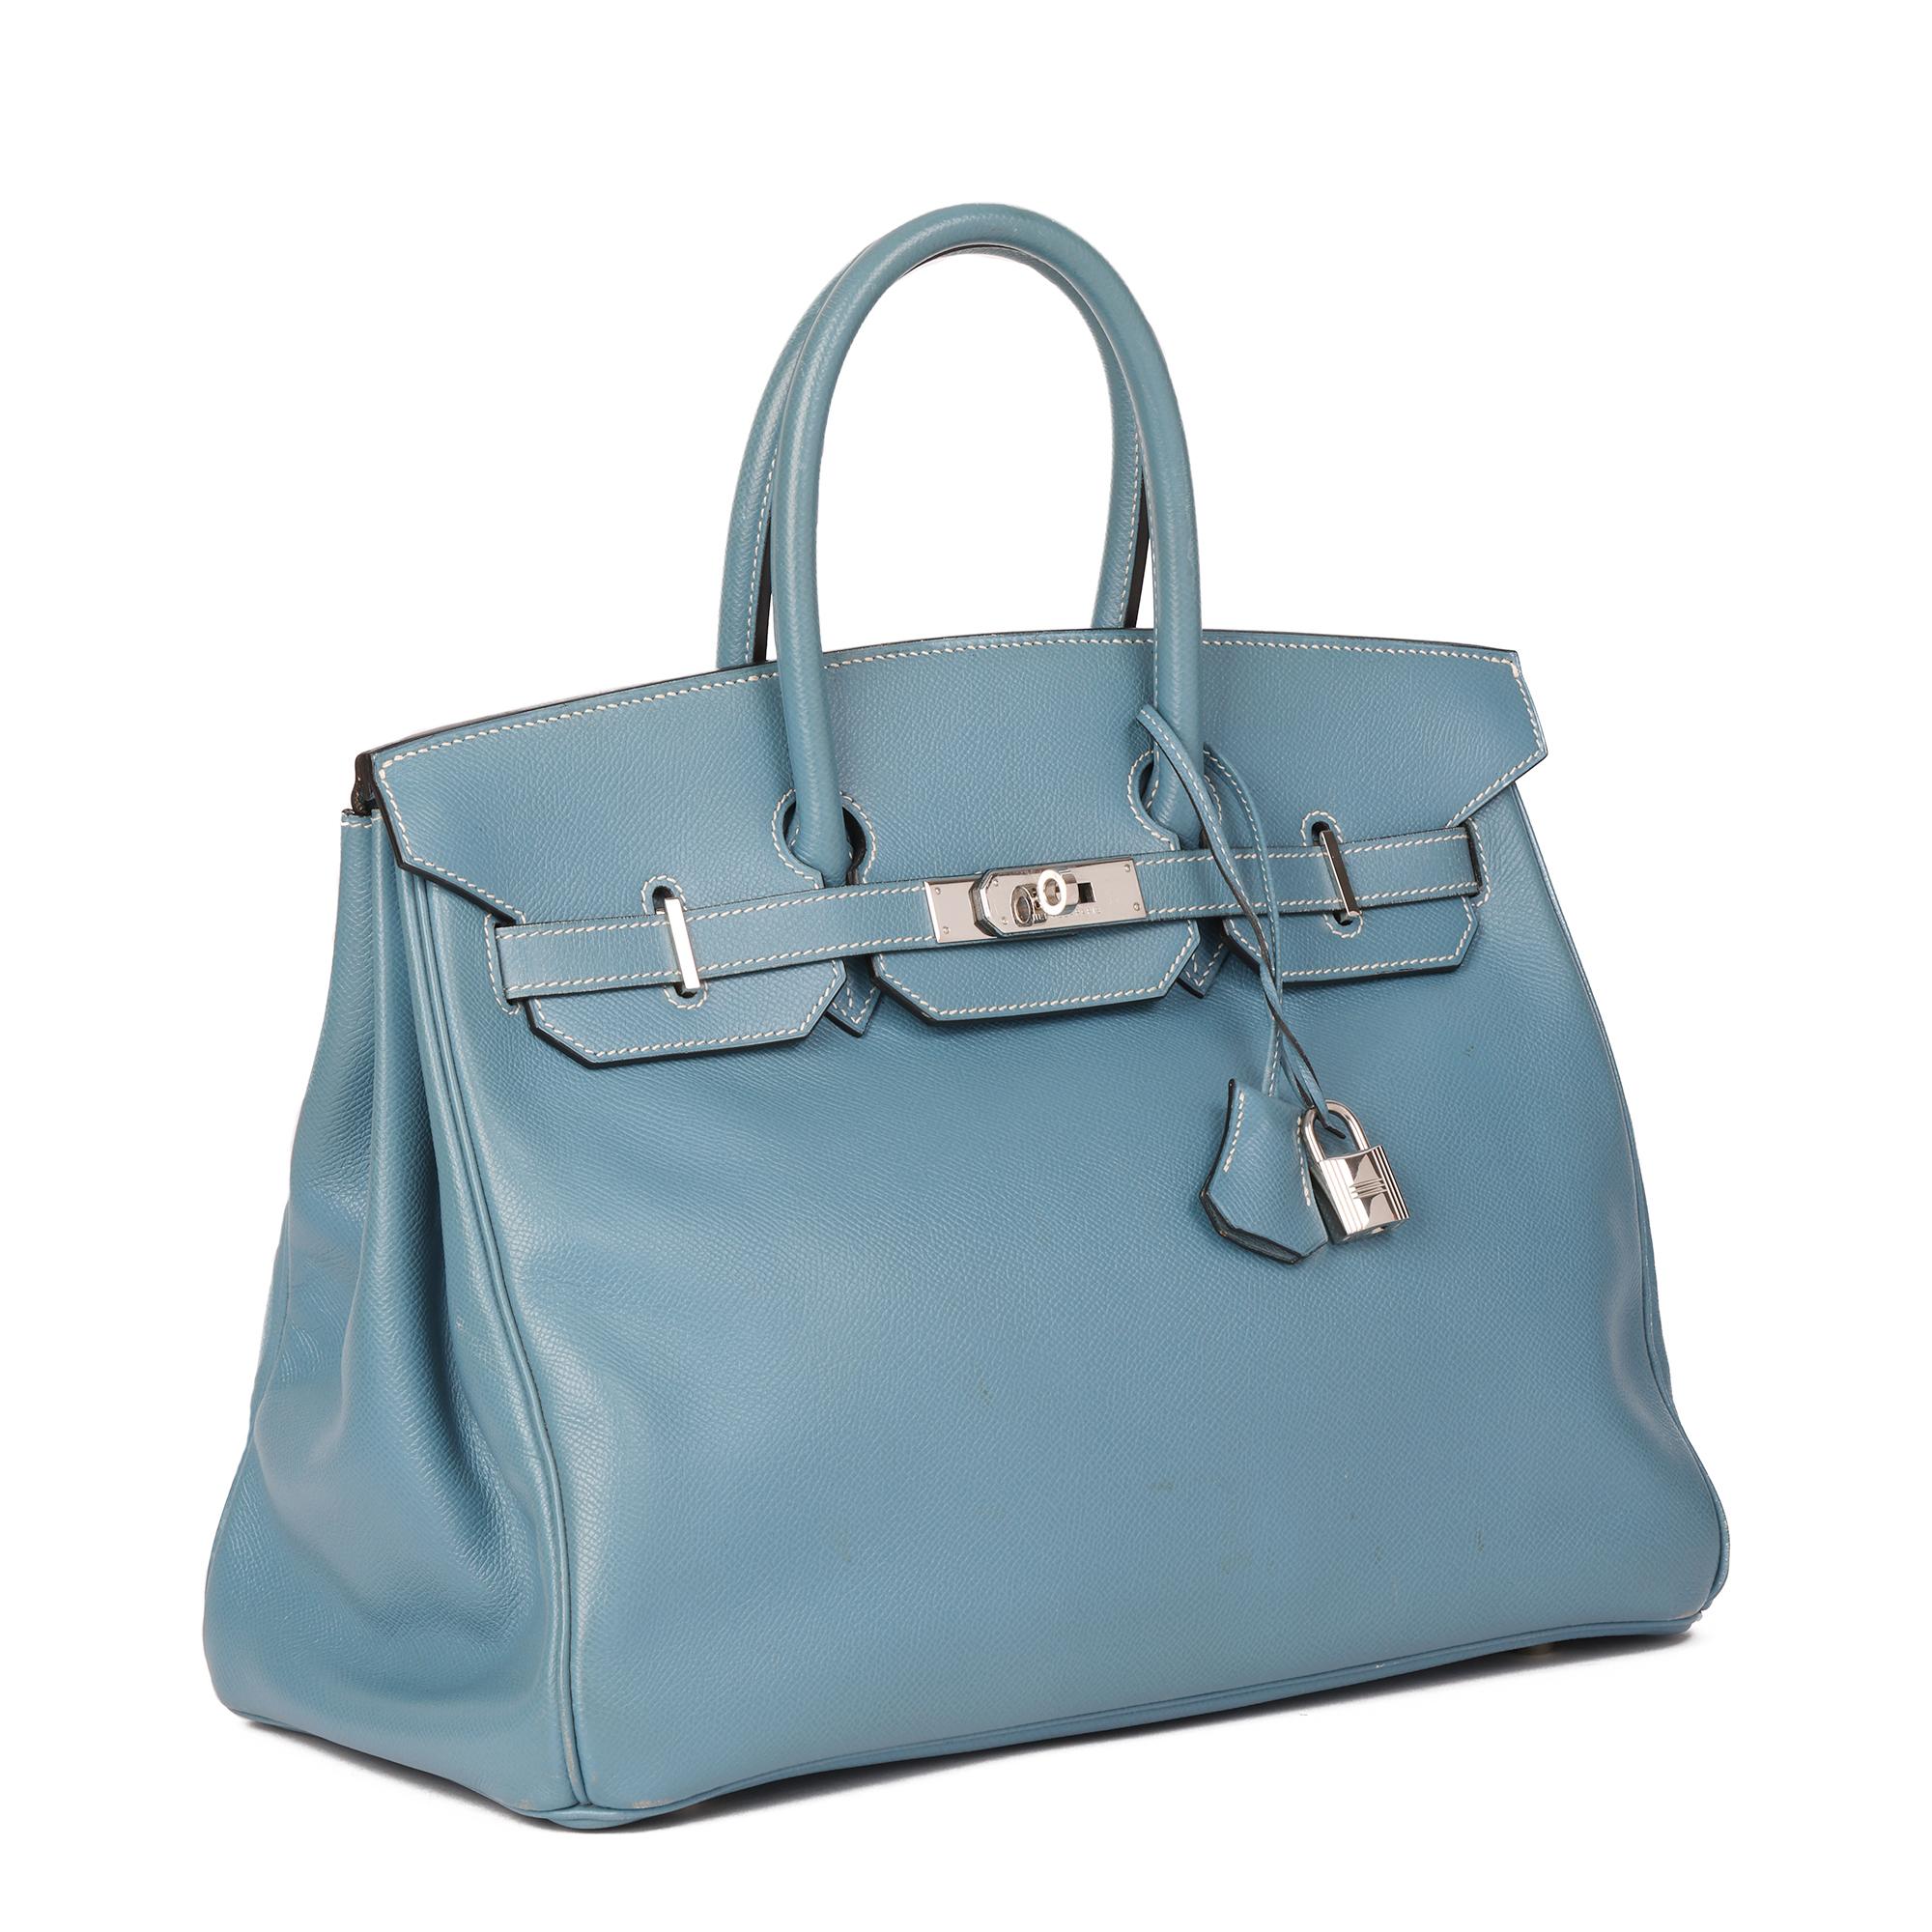 HERMÈS
Blue Jean Epsom Leather Birkin 35cm Retourne

Xupes Reference: CB470
Serial Number: [B]
Age (Circa): 1998
Accompanied By: Hermès Dust Bag, Padlock, Keys, Clochette
Authenticity Details: Date Stamp (Made in France)
Gender: Ladies
Type: